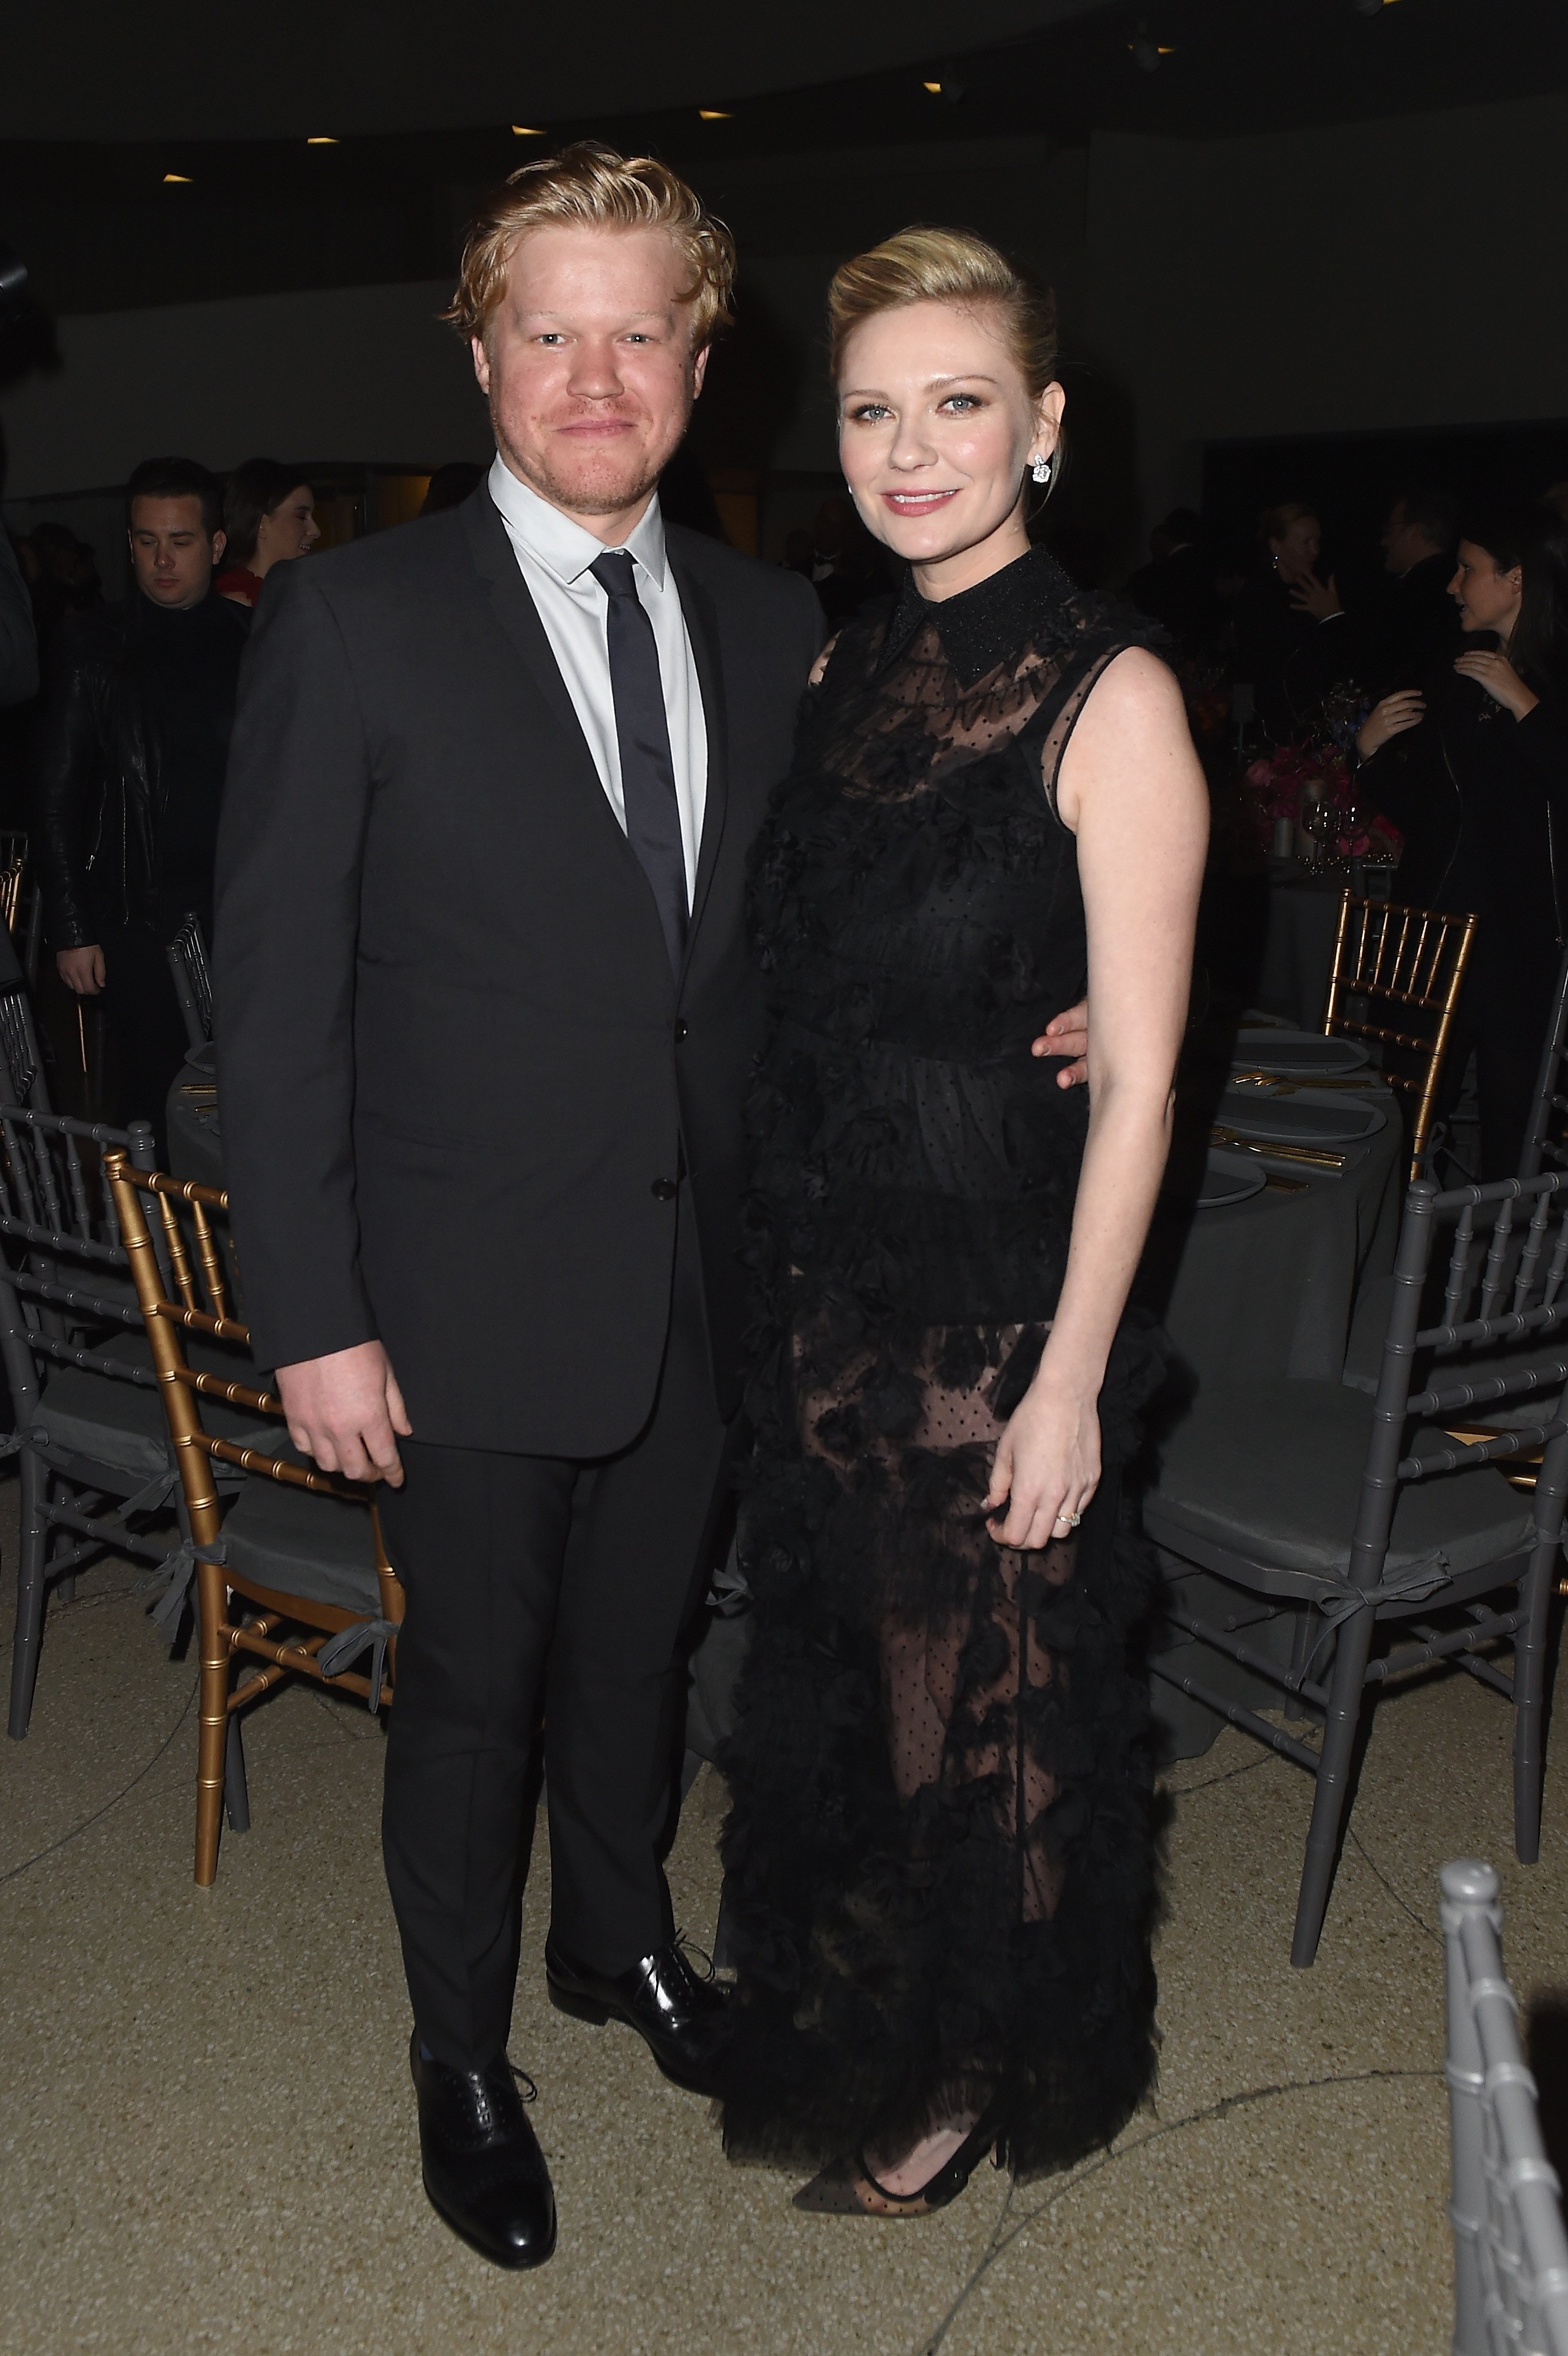 Jesse Plemons and Kirsten Dunst attend the 2017 Guggenheim International Gala by Dior on November 16, 2017 in New York City. | Photo: Getty Images